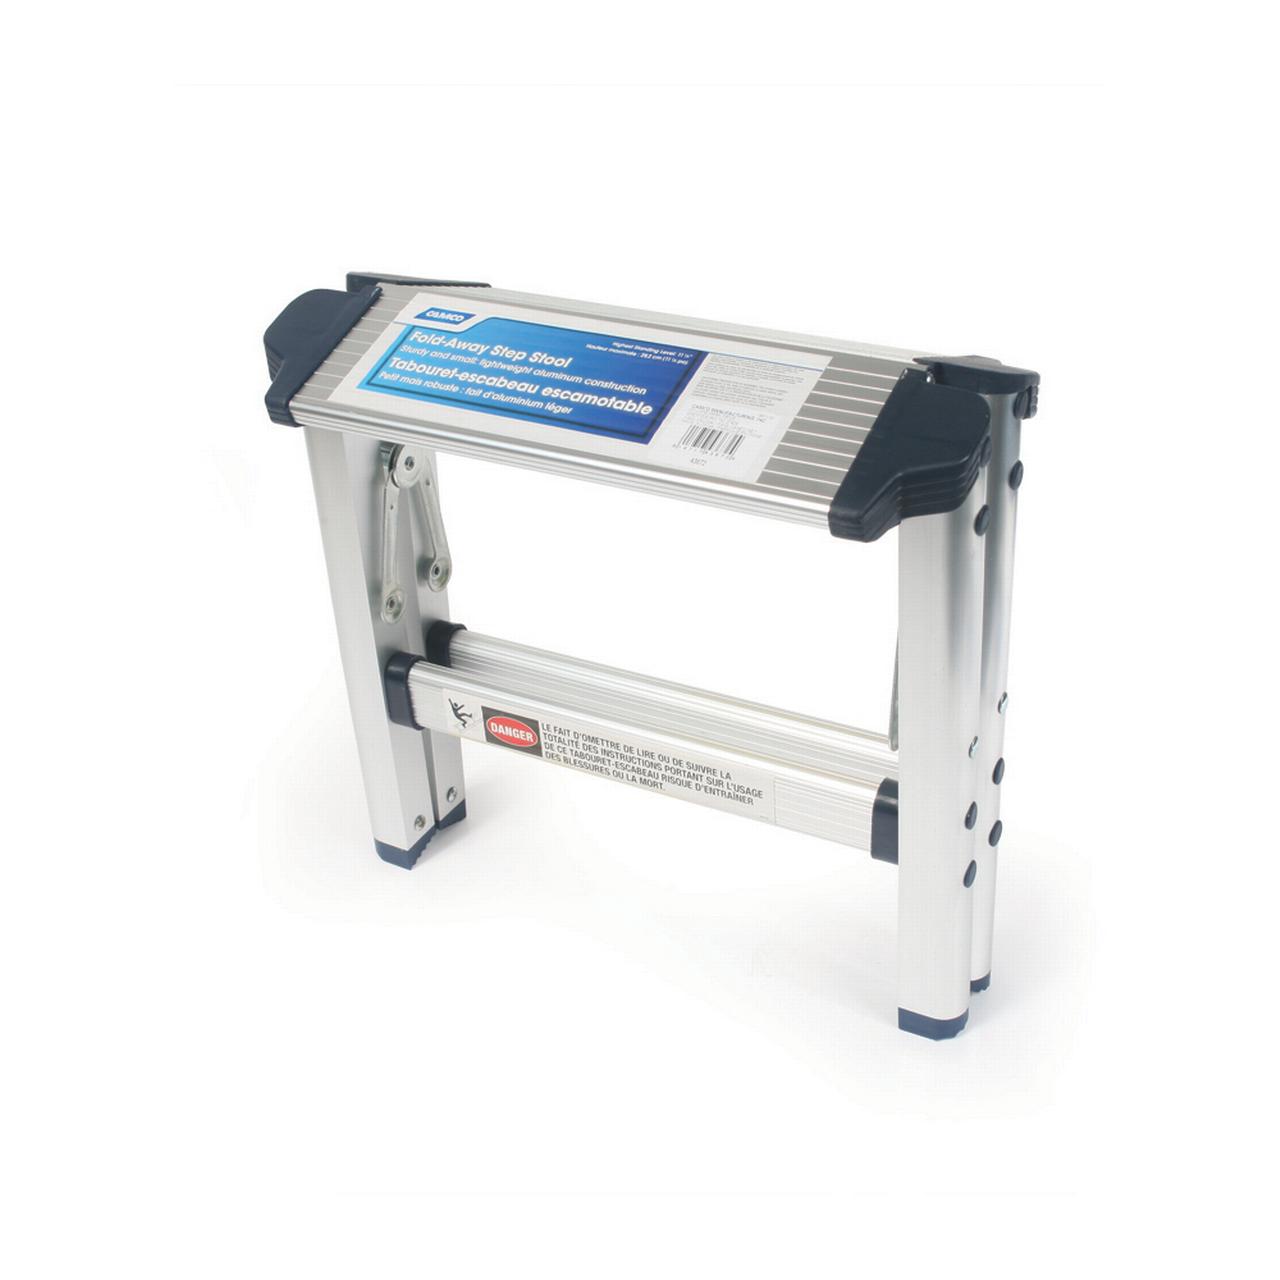 Camco Aluminum Single Step Stool | Folding with Plastic Feet | Supports Up to 200 lbs. | (43672) - image 4 of 4